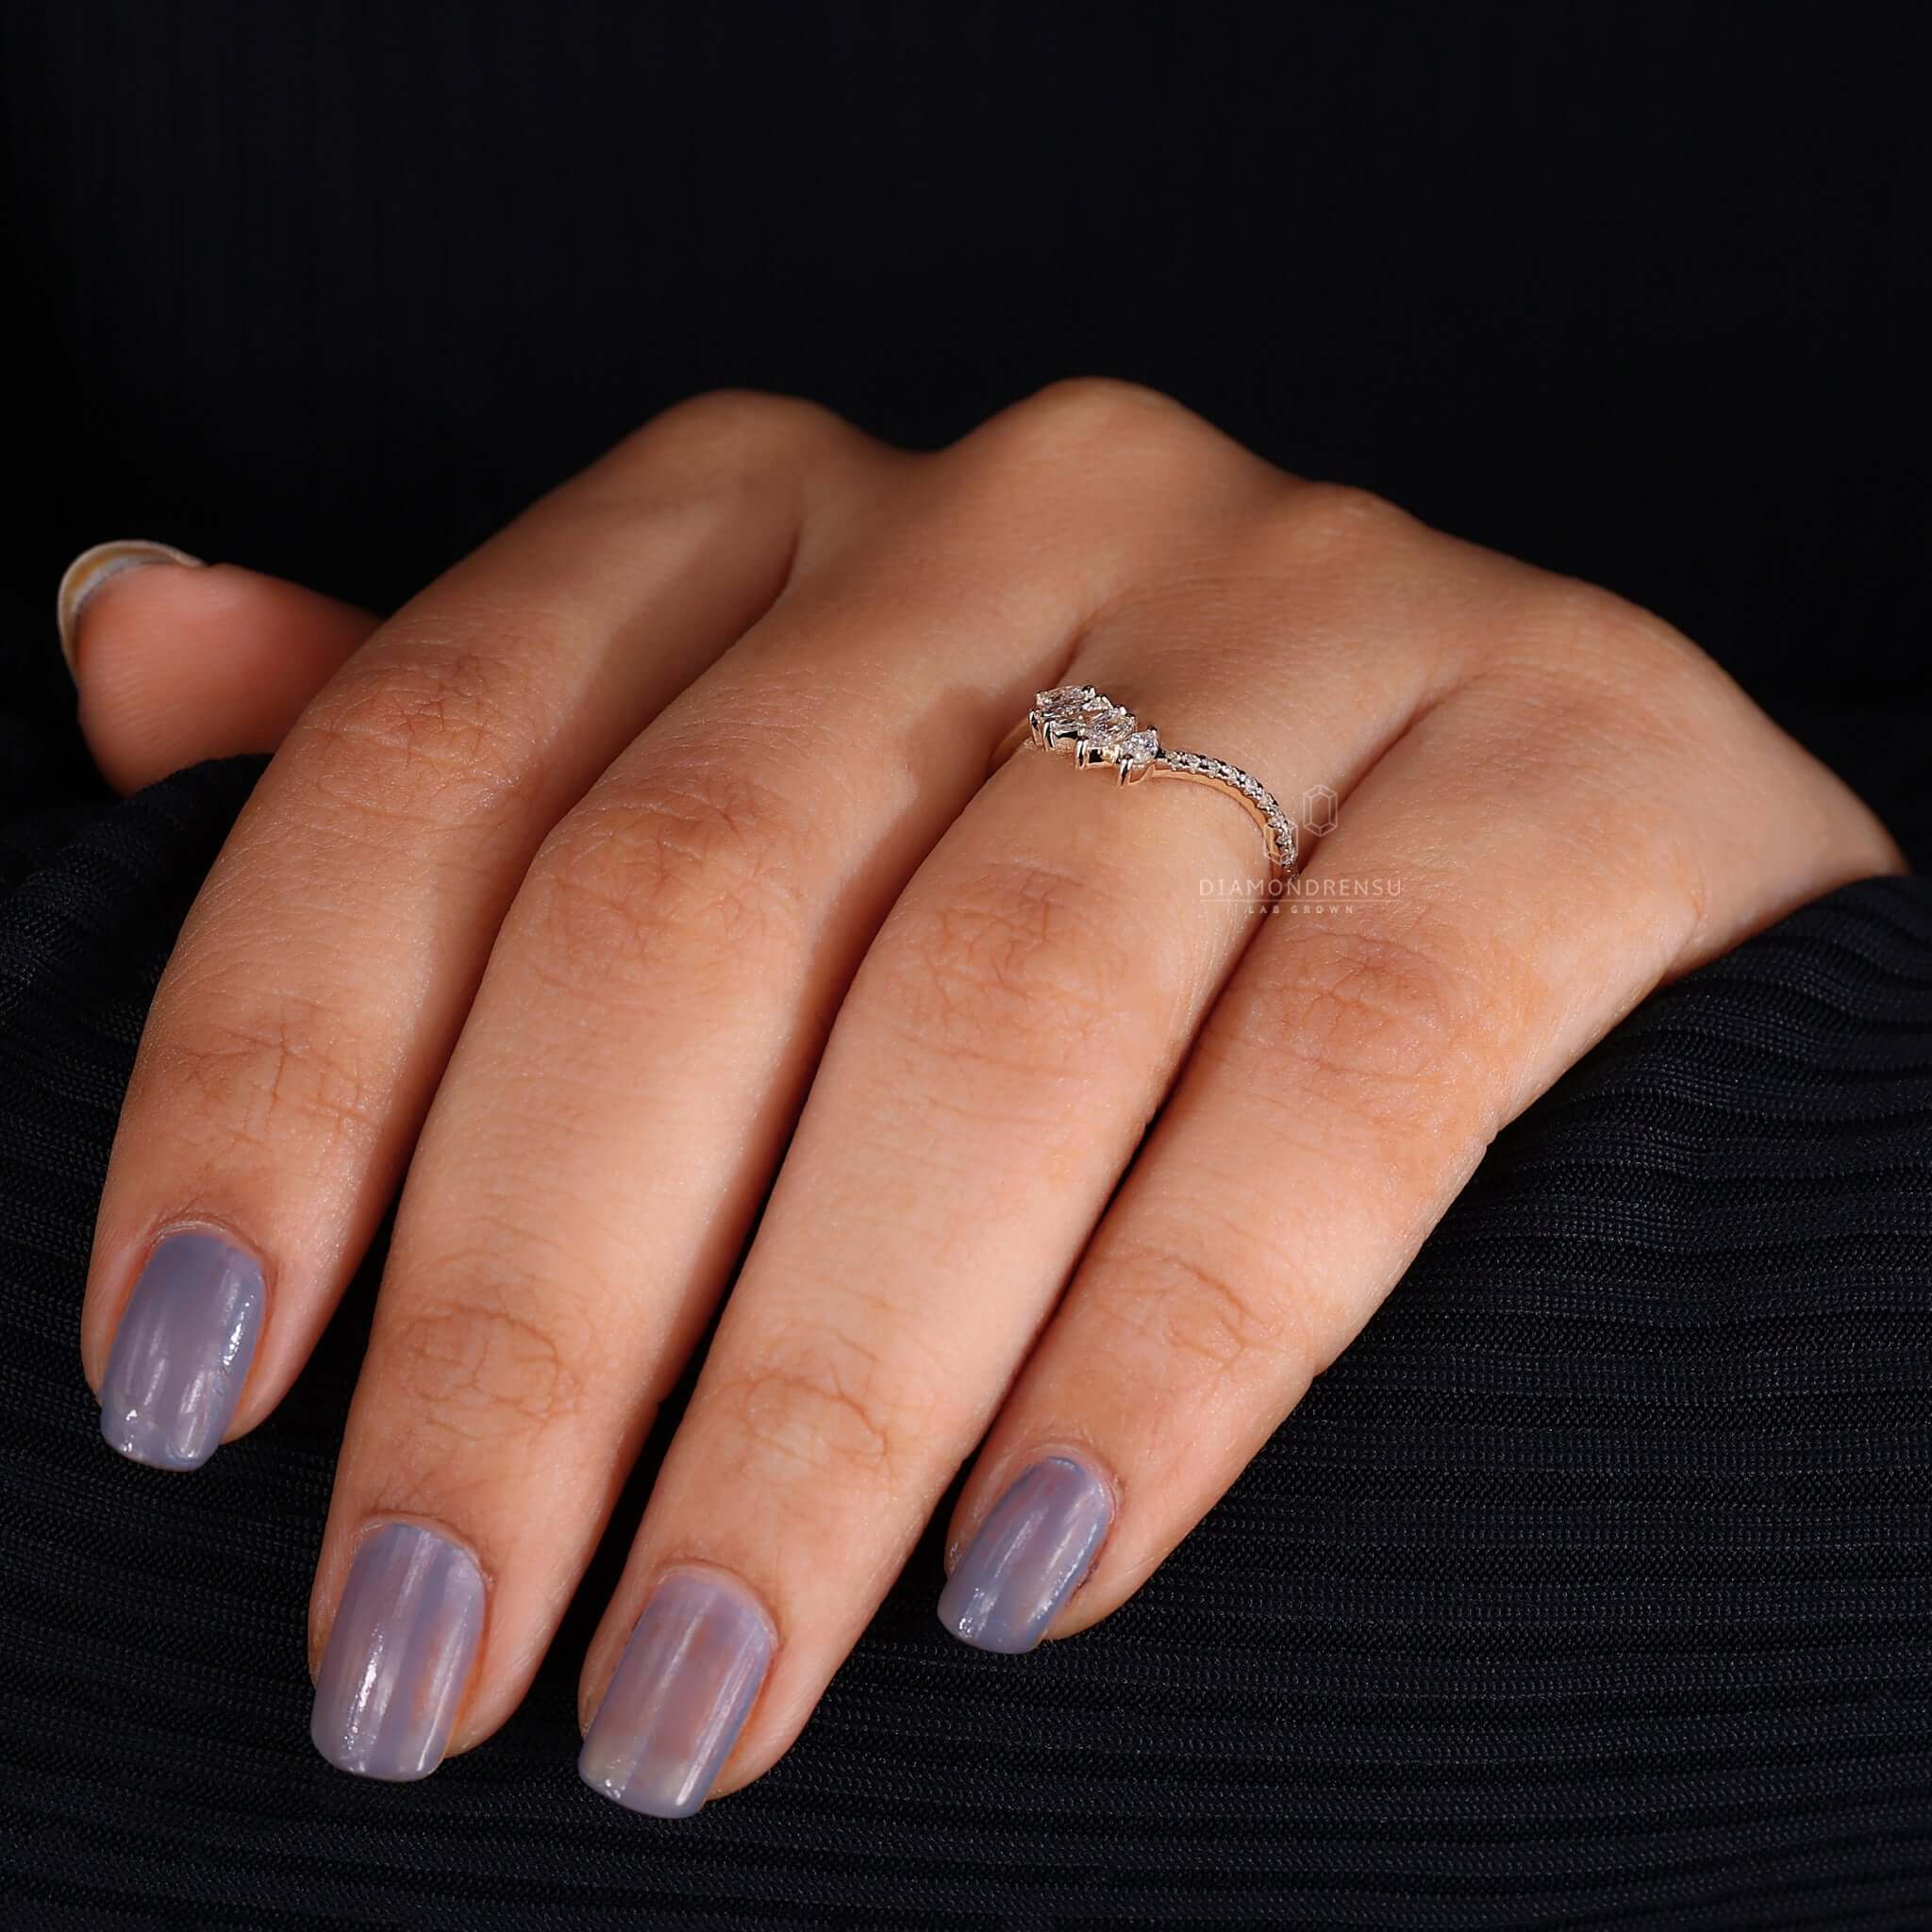 White gold diamond wedding band on a woman's hand, symbolizing love and commitment.